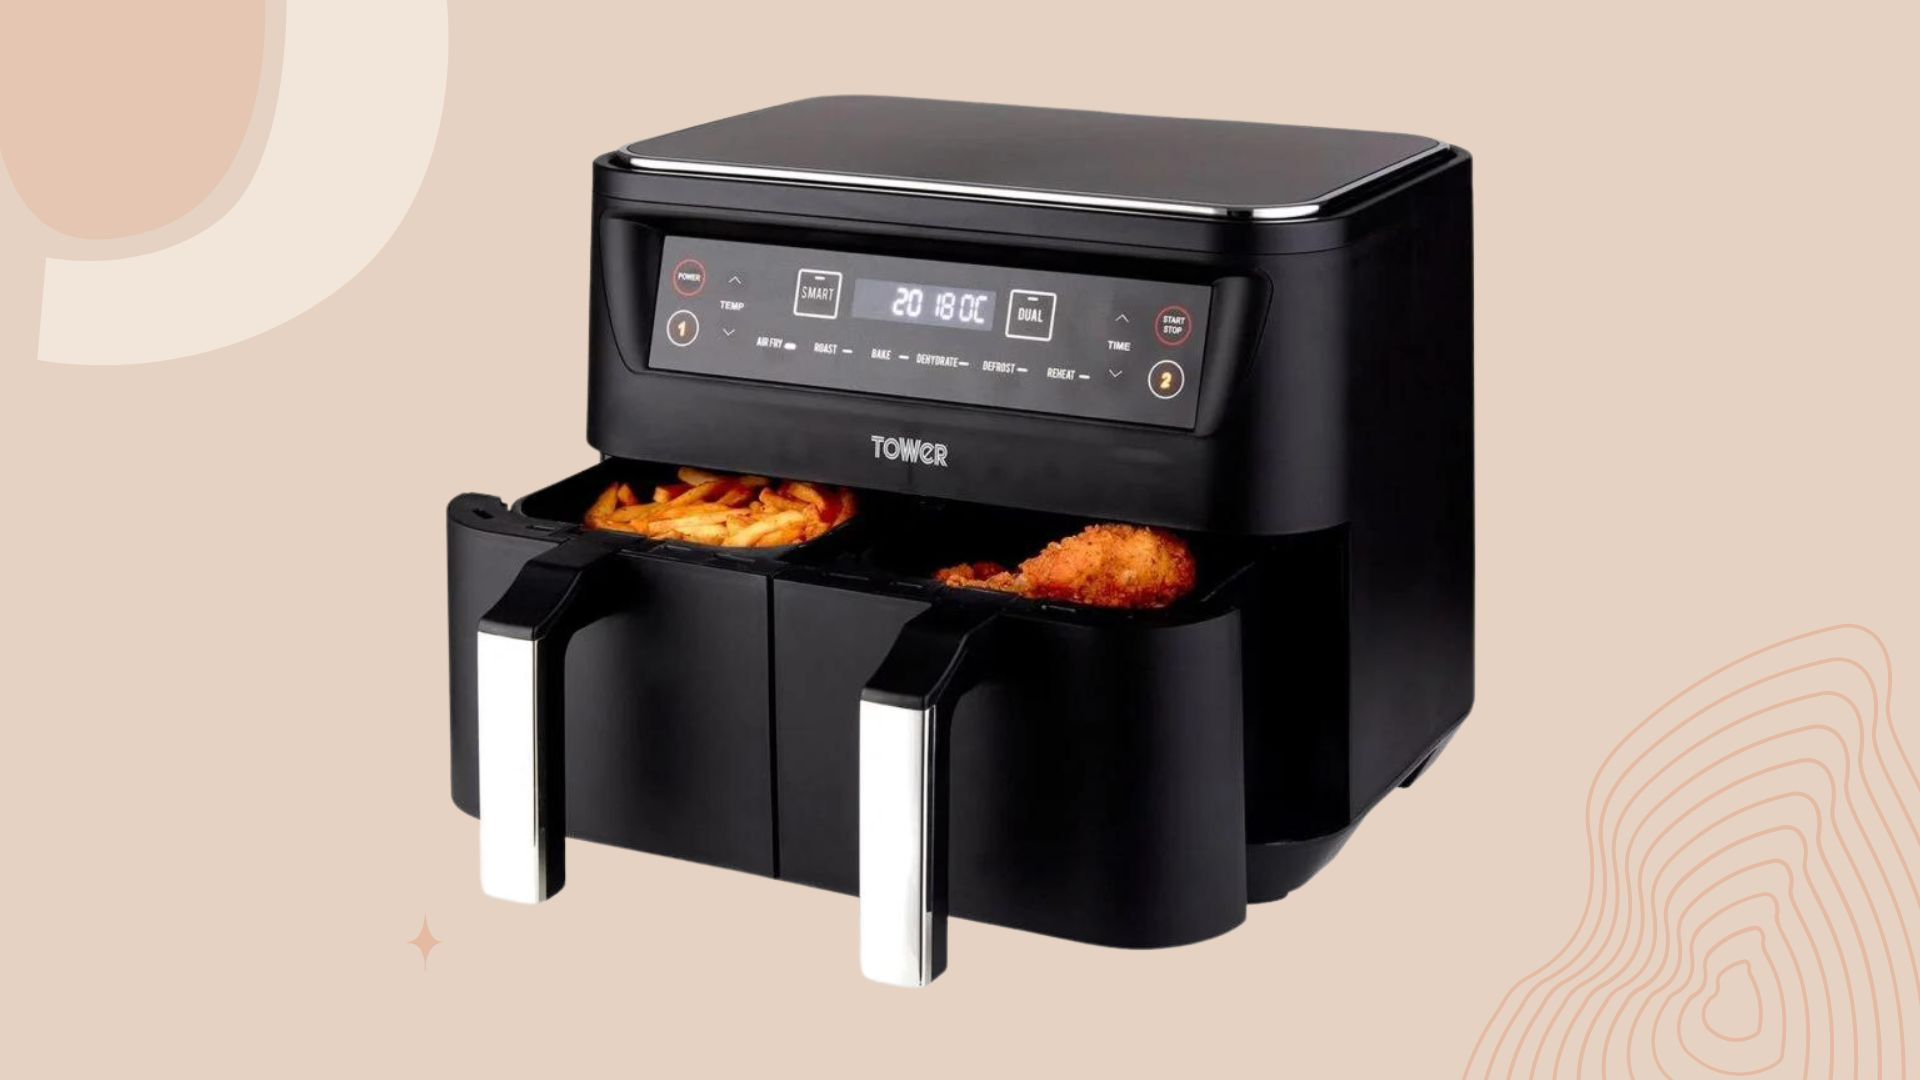 Ultrean Air Fryer, 4.2qt Electric Hot Air Fryers Oven Oilless Cooker with LCD